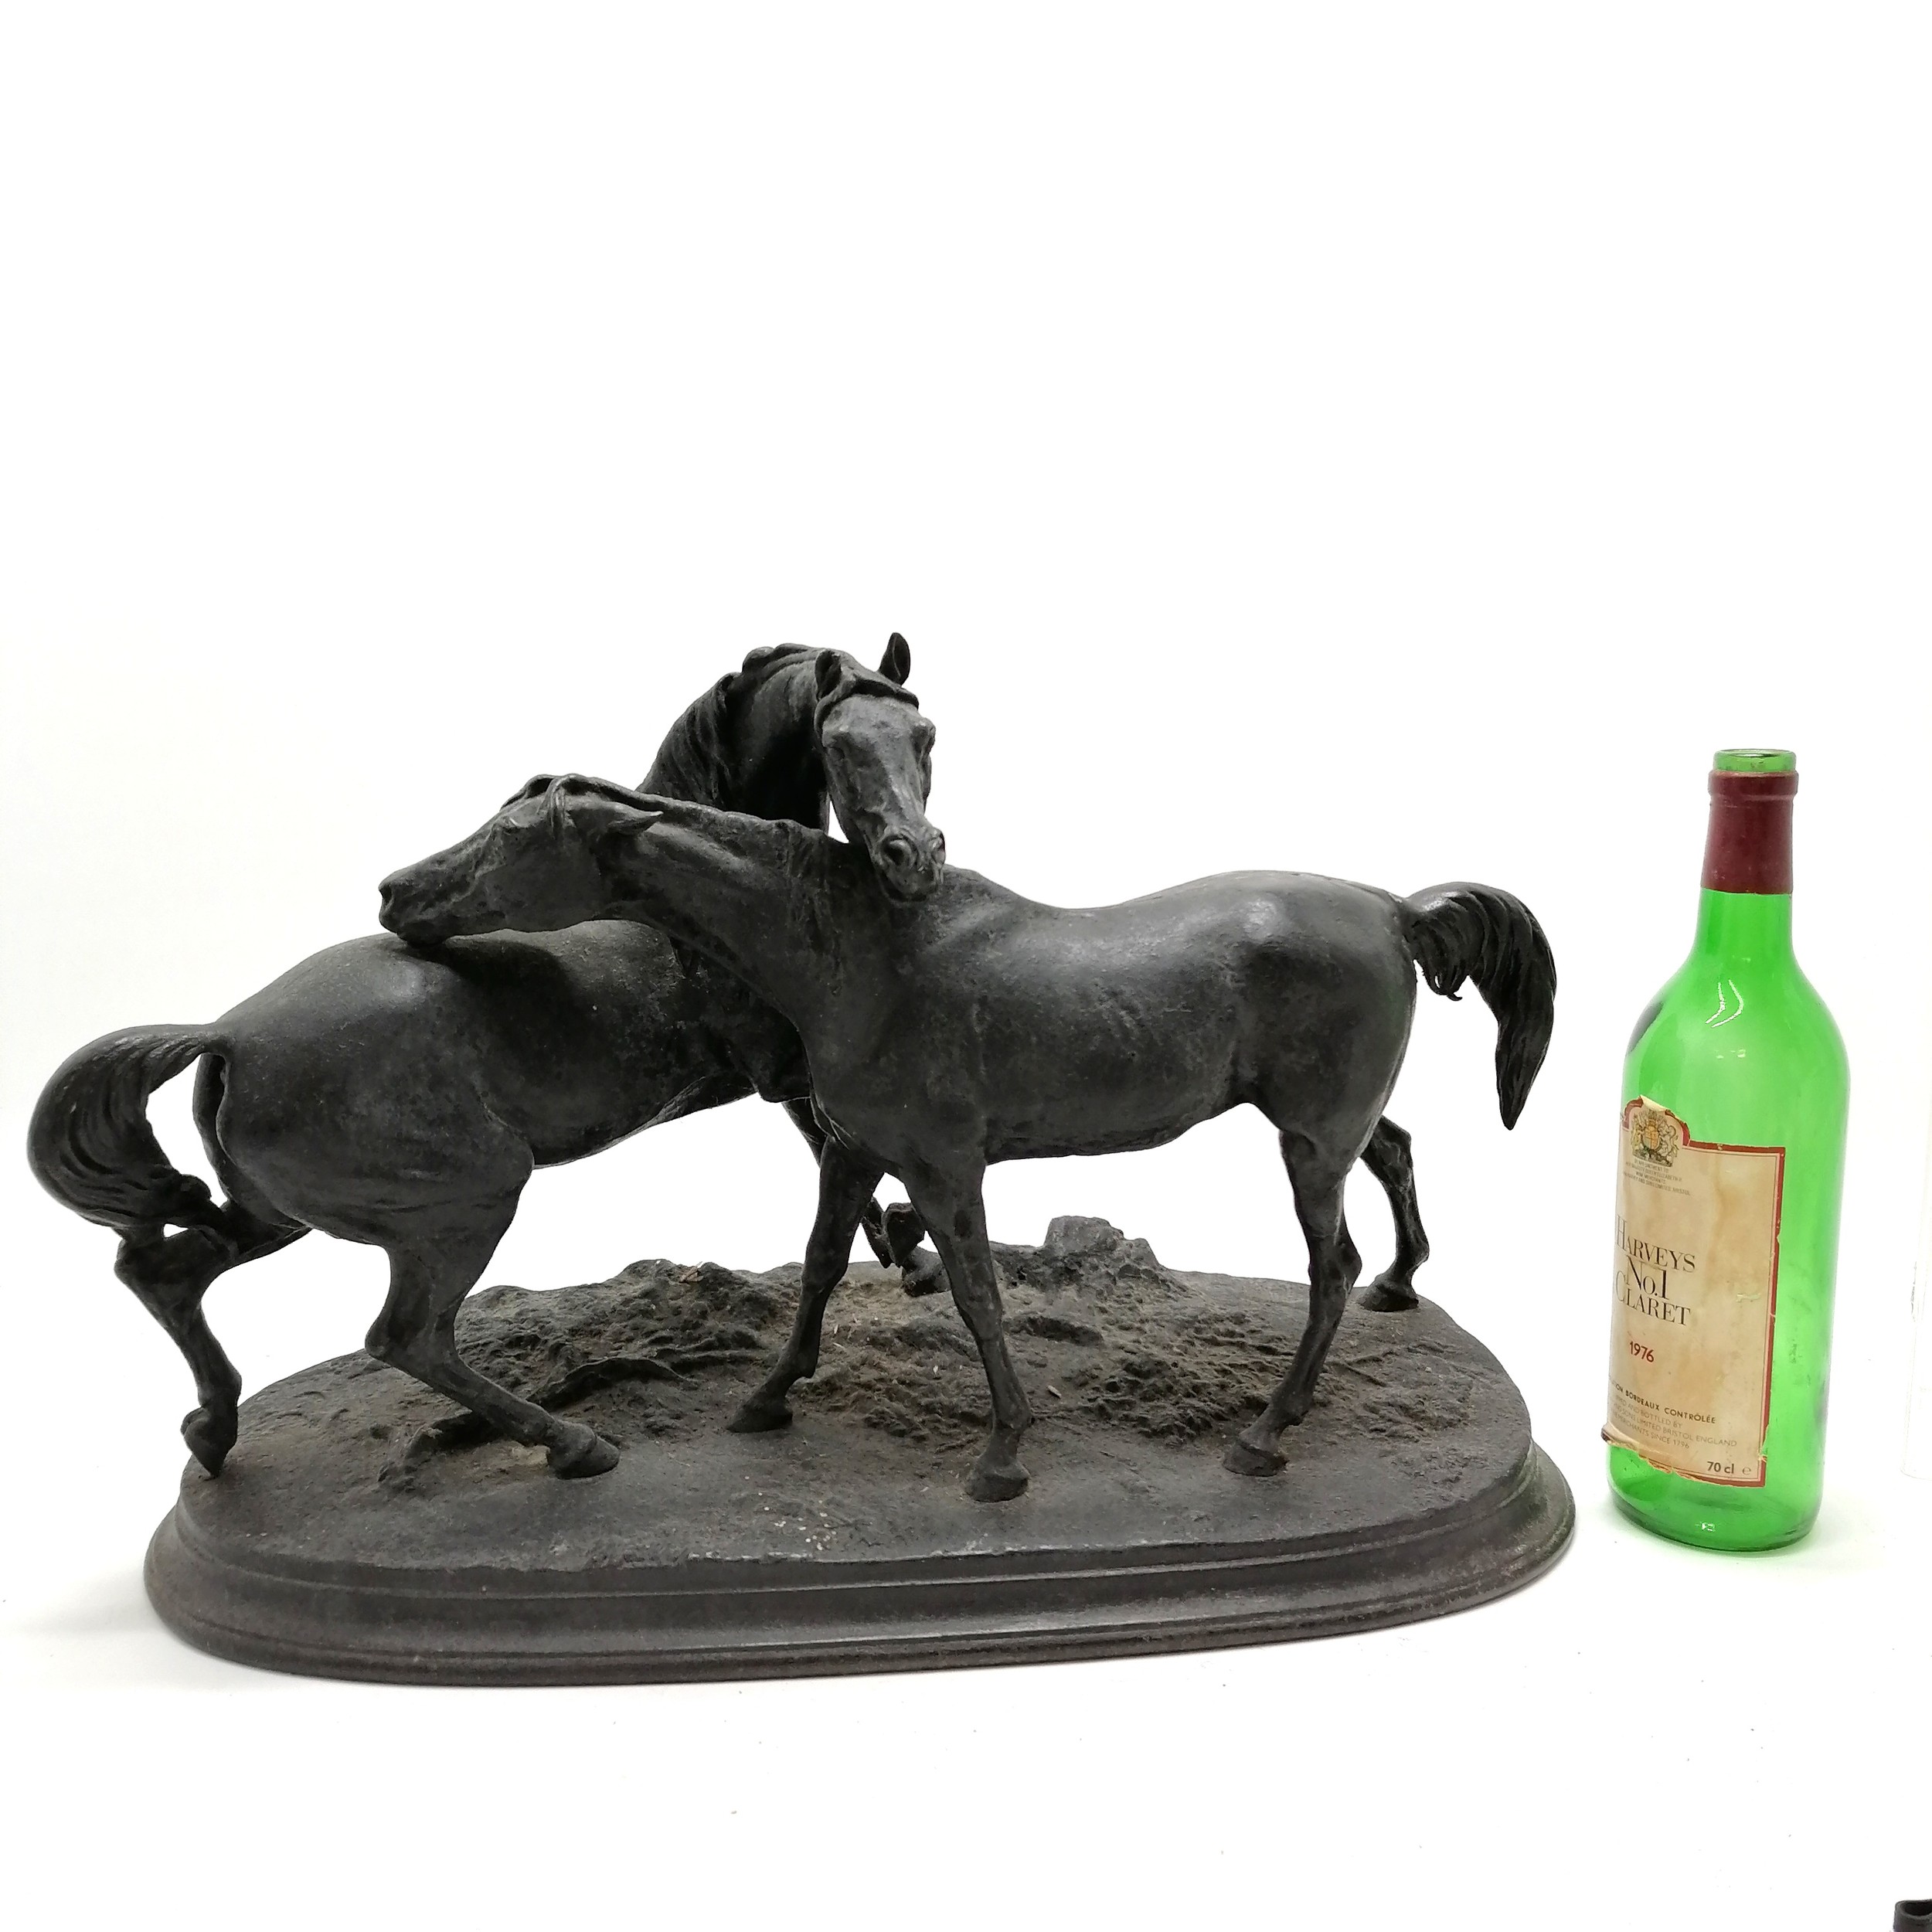 Antique large spelter figure group of a pair of horses, signed P J Mene, in good overall